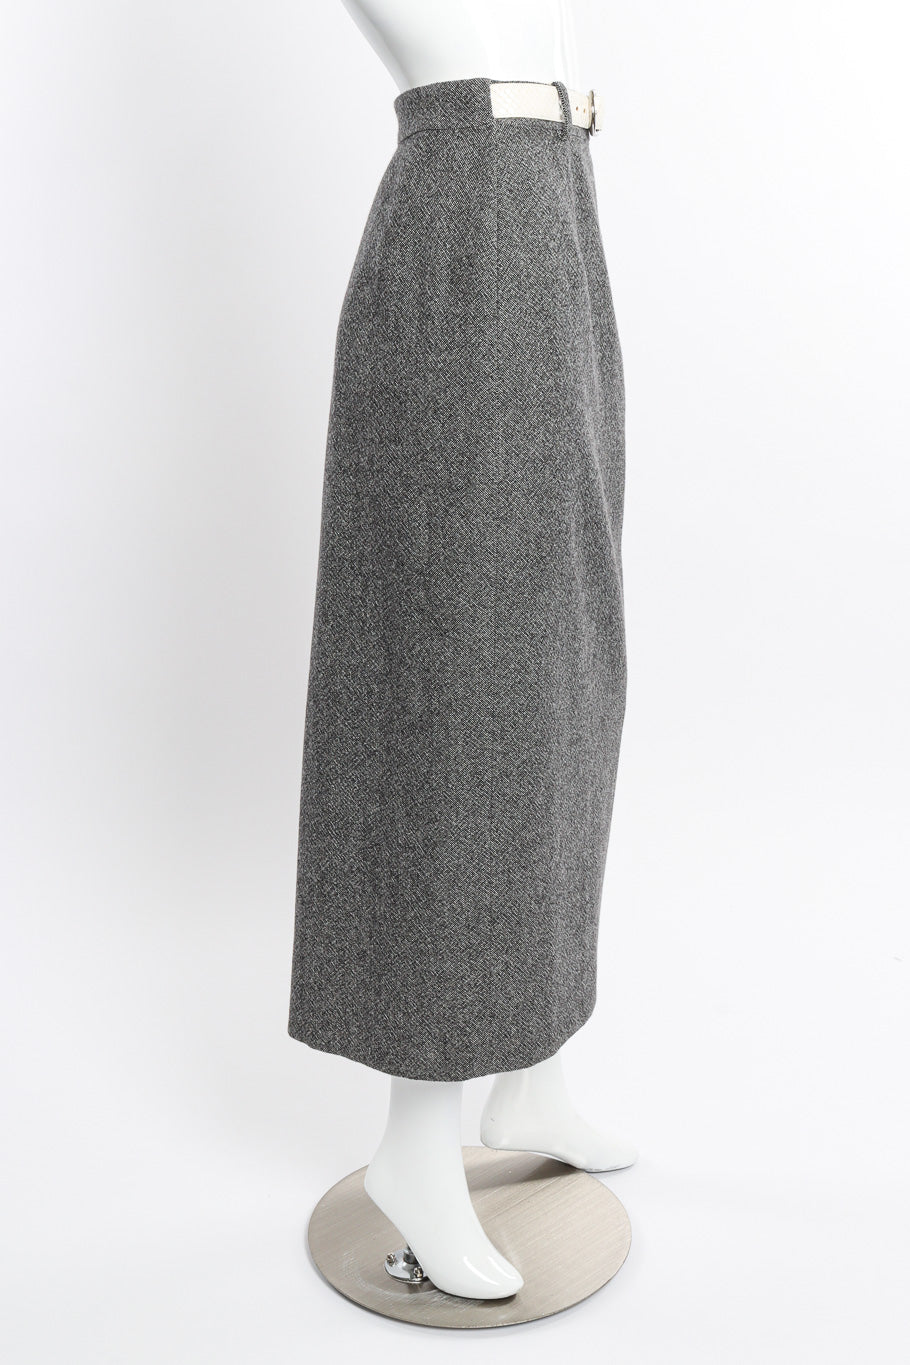 Wool Jacket & Wrap Skirt Suit by Christian Dior on mannequin skirt only side @recessla